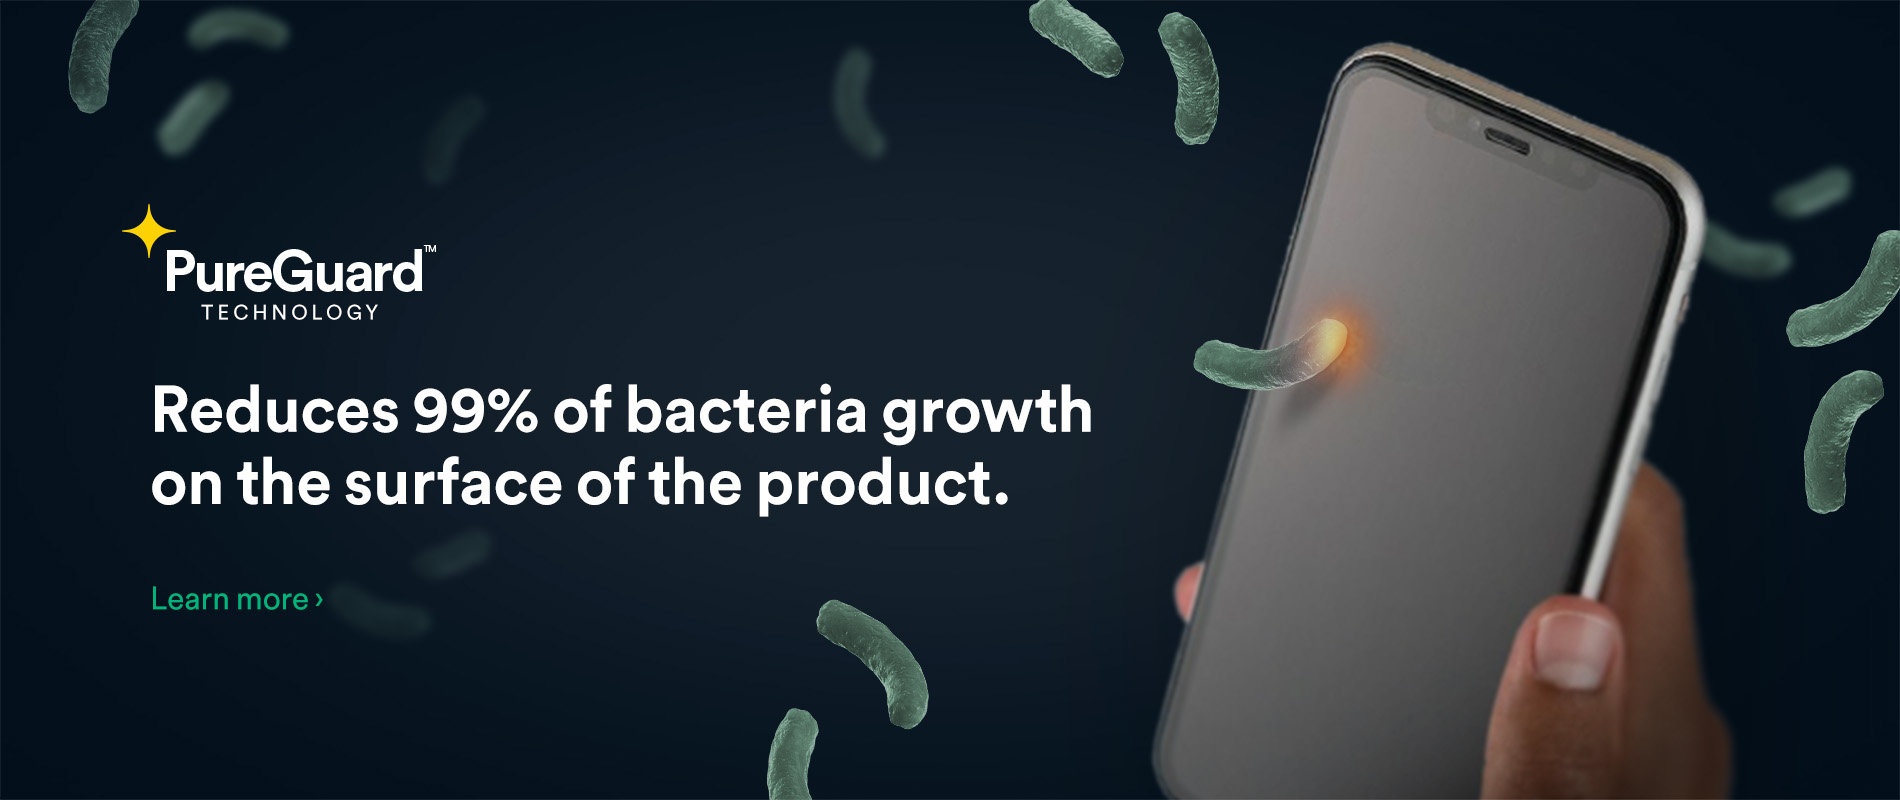 PureGuard antimicrobial technology helps prevent bacteria from growing on the surface of your phone. Click to learn more.